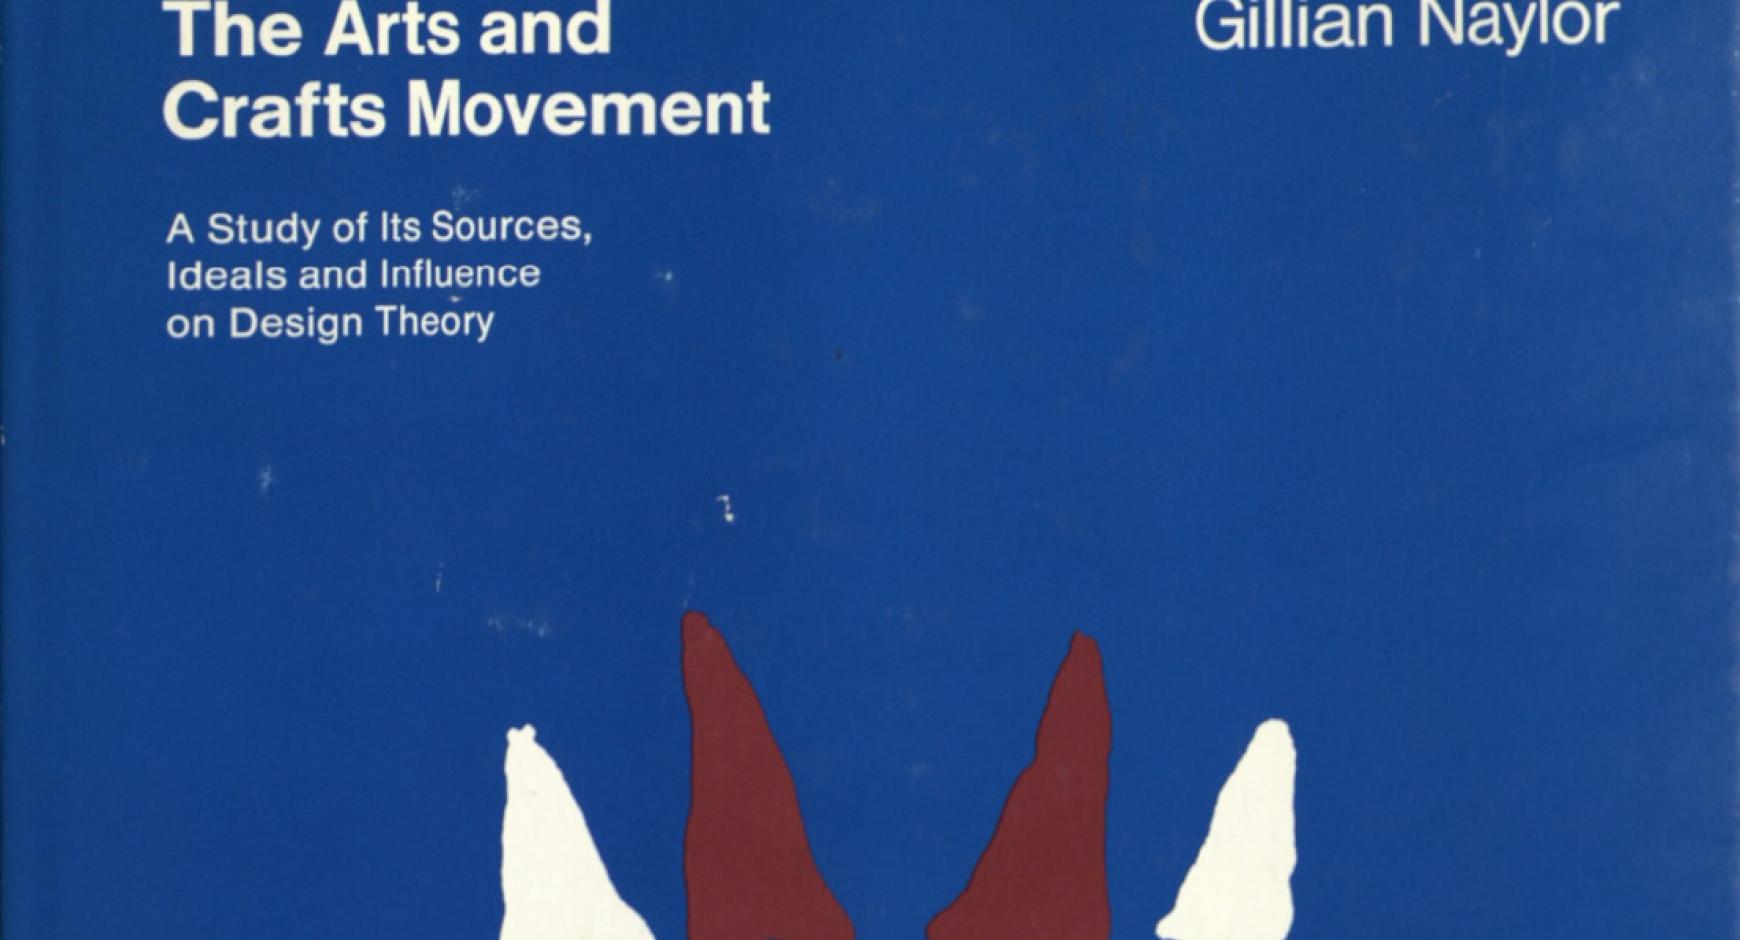 This image is a photograph of the cover of a book written by Gillian Naylor.  The words "The Arts and Crafts Movement: A Study of Its Sources, Ideals and Influence on Design Theory" are printed in white on a field of dark blue.